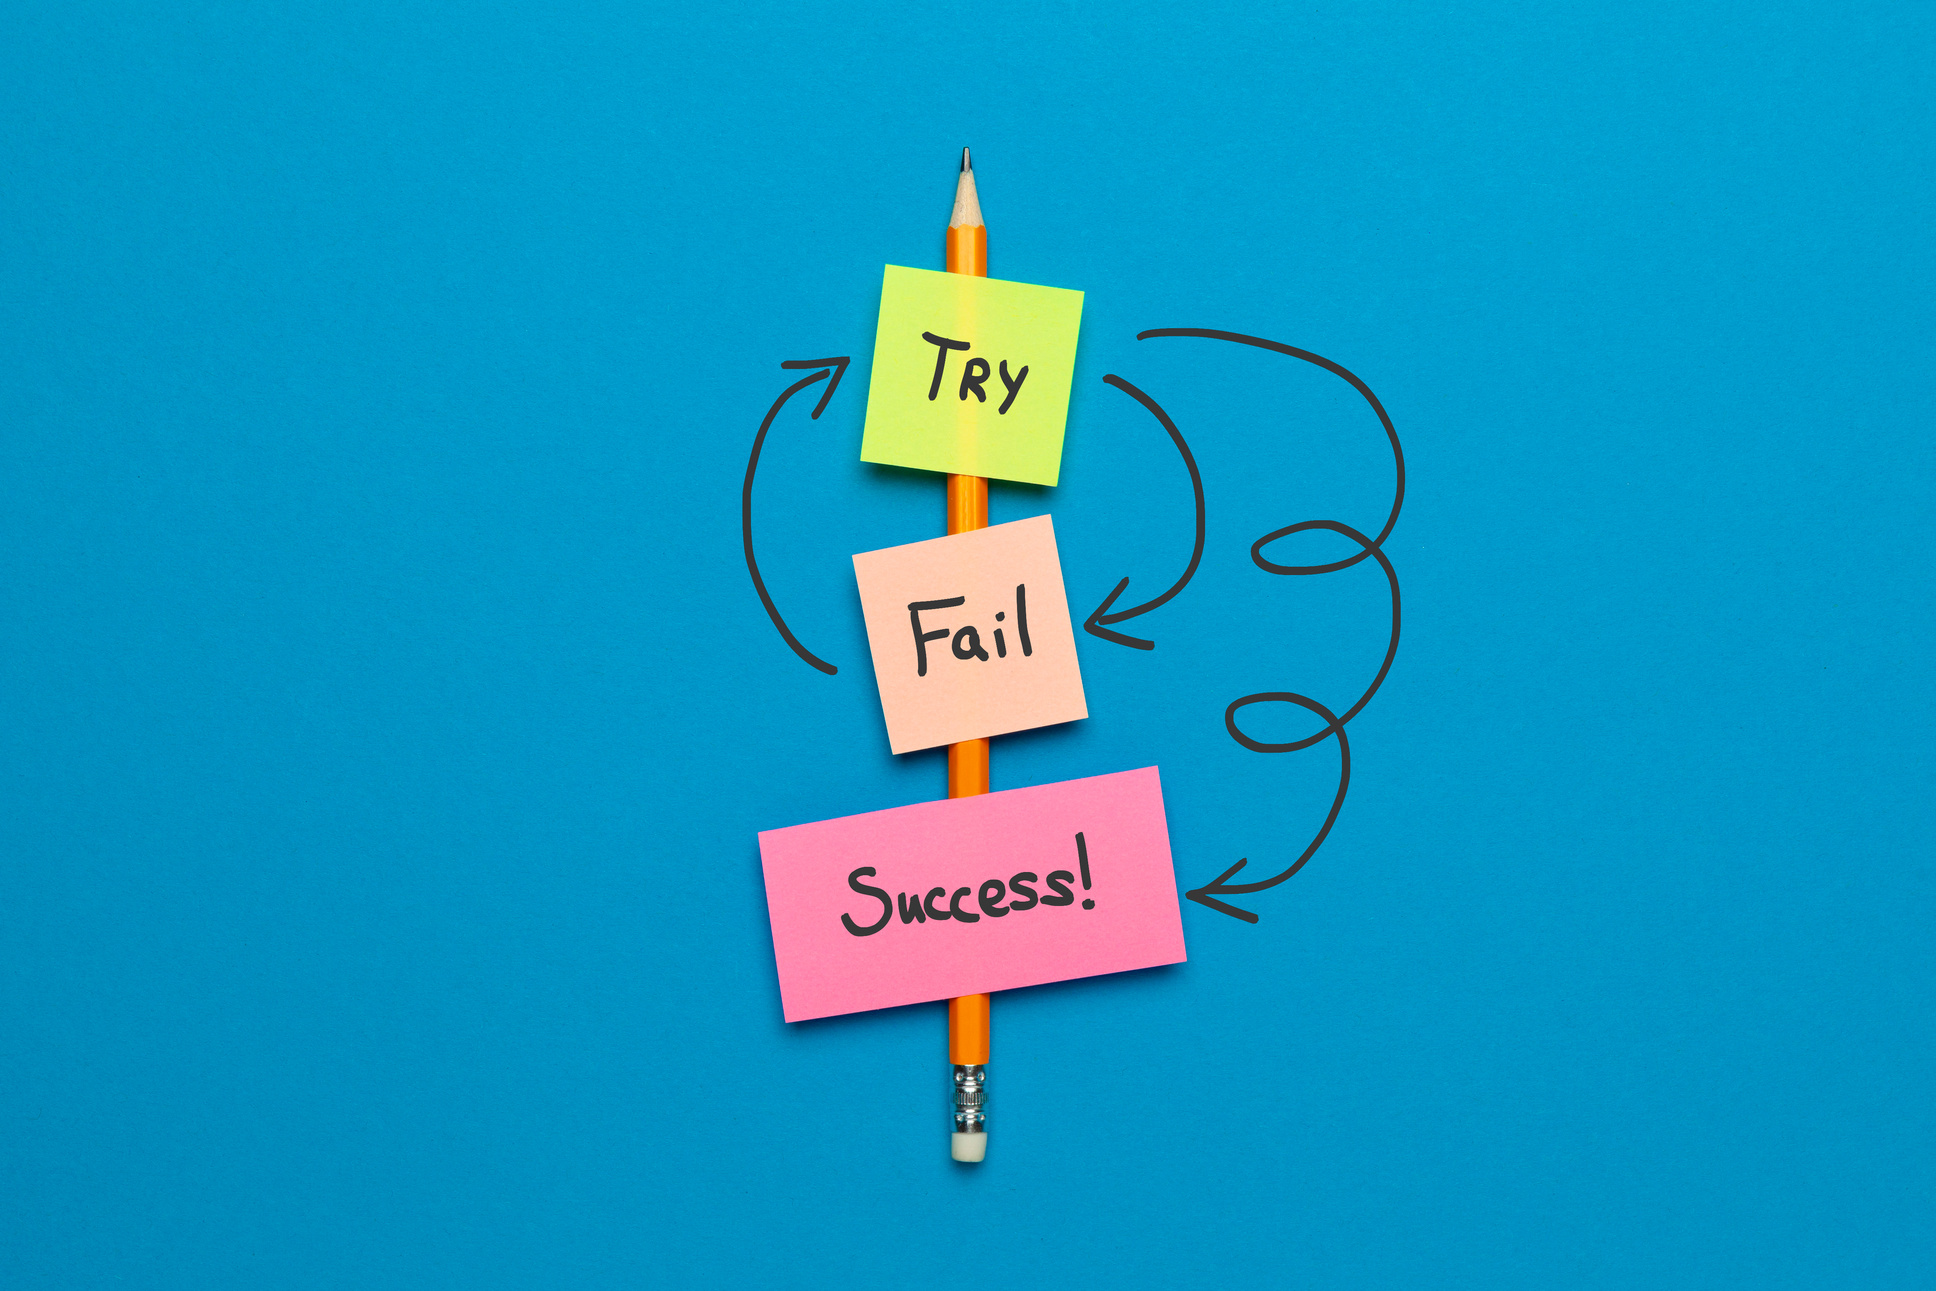 Try - Fail - Success. Purpose and movement to success despite obstacles